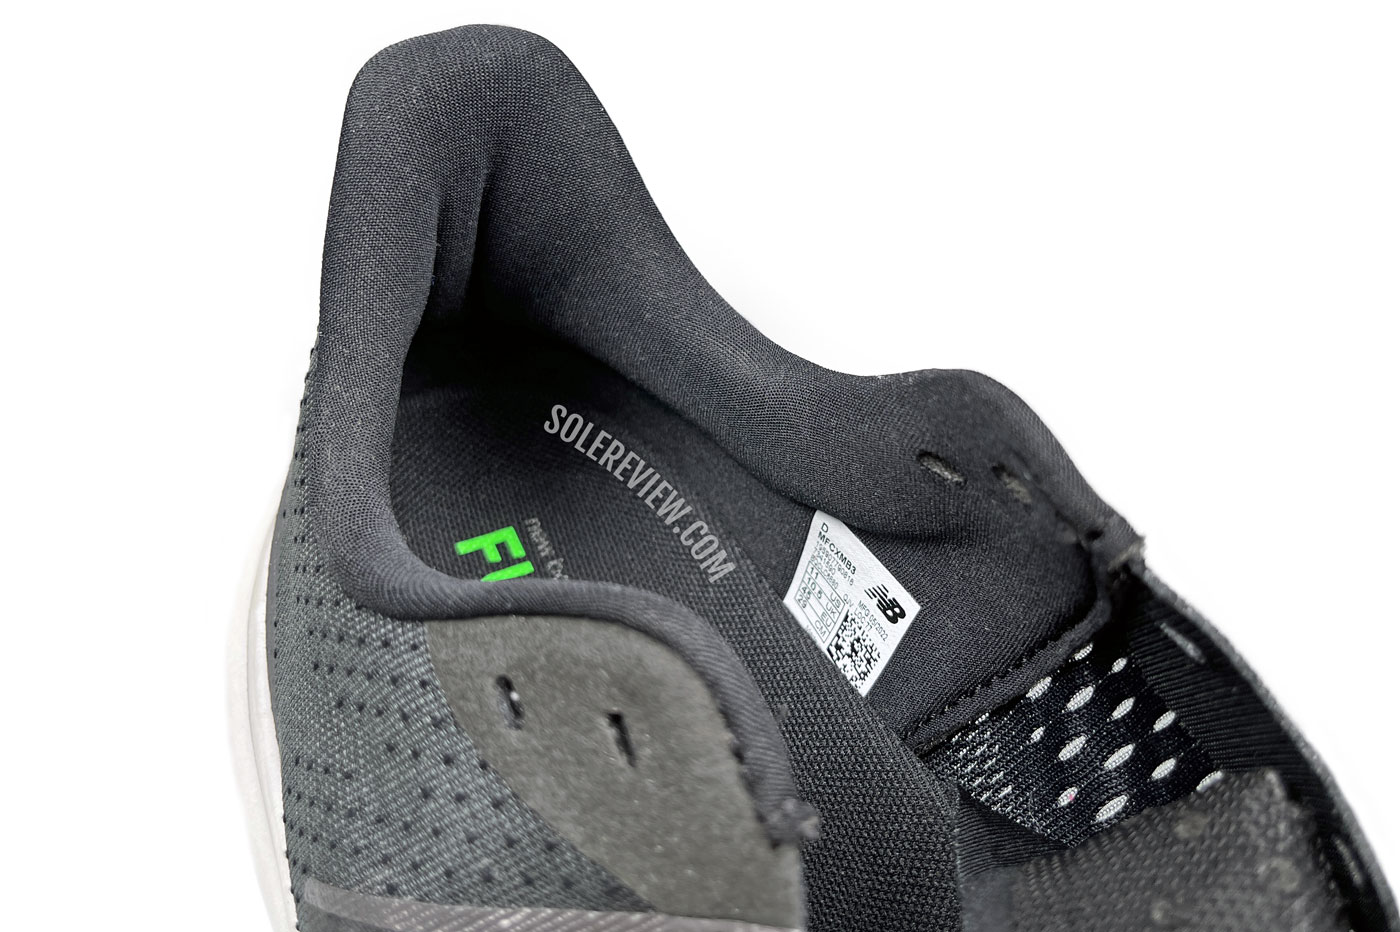 The heel collar of the New Balance Fuelcell Rebel V3.